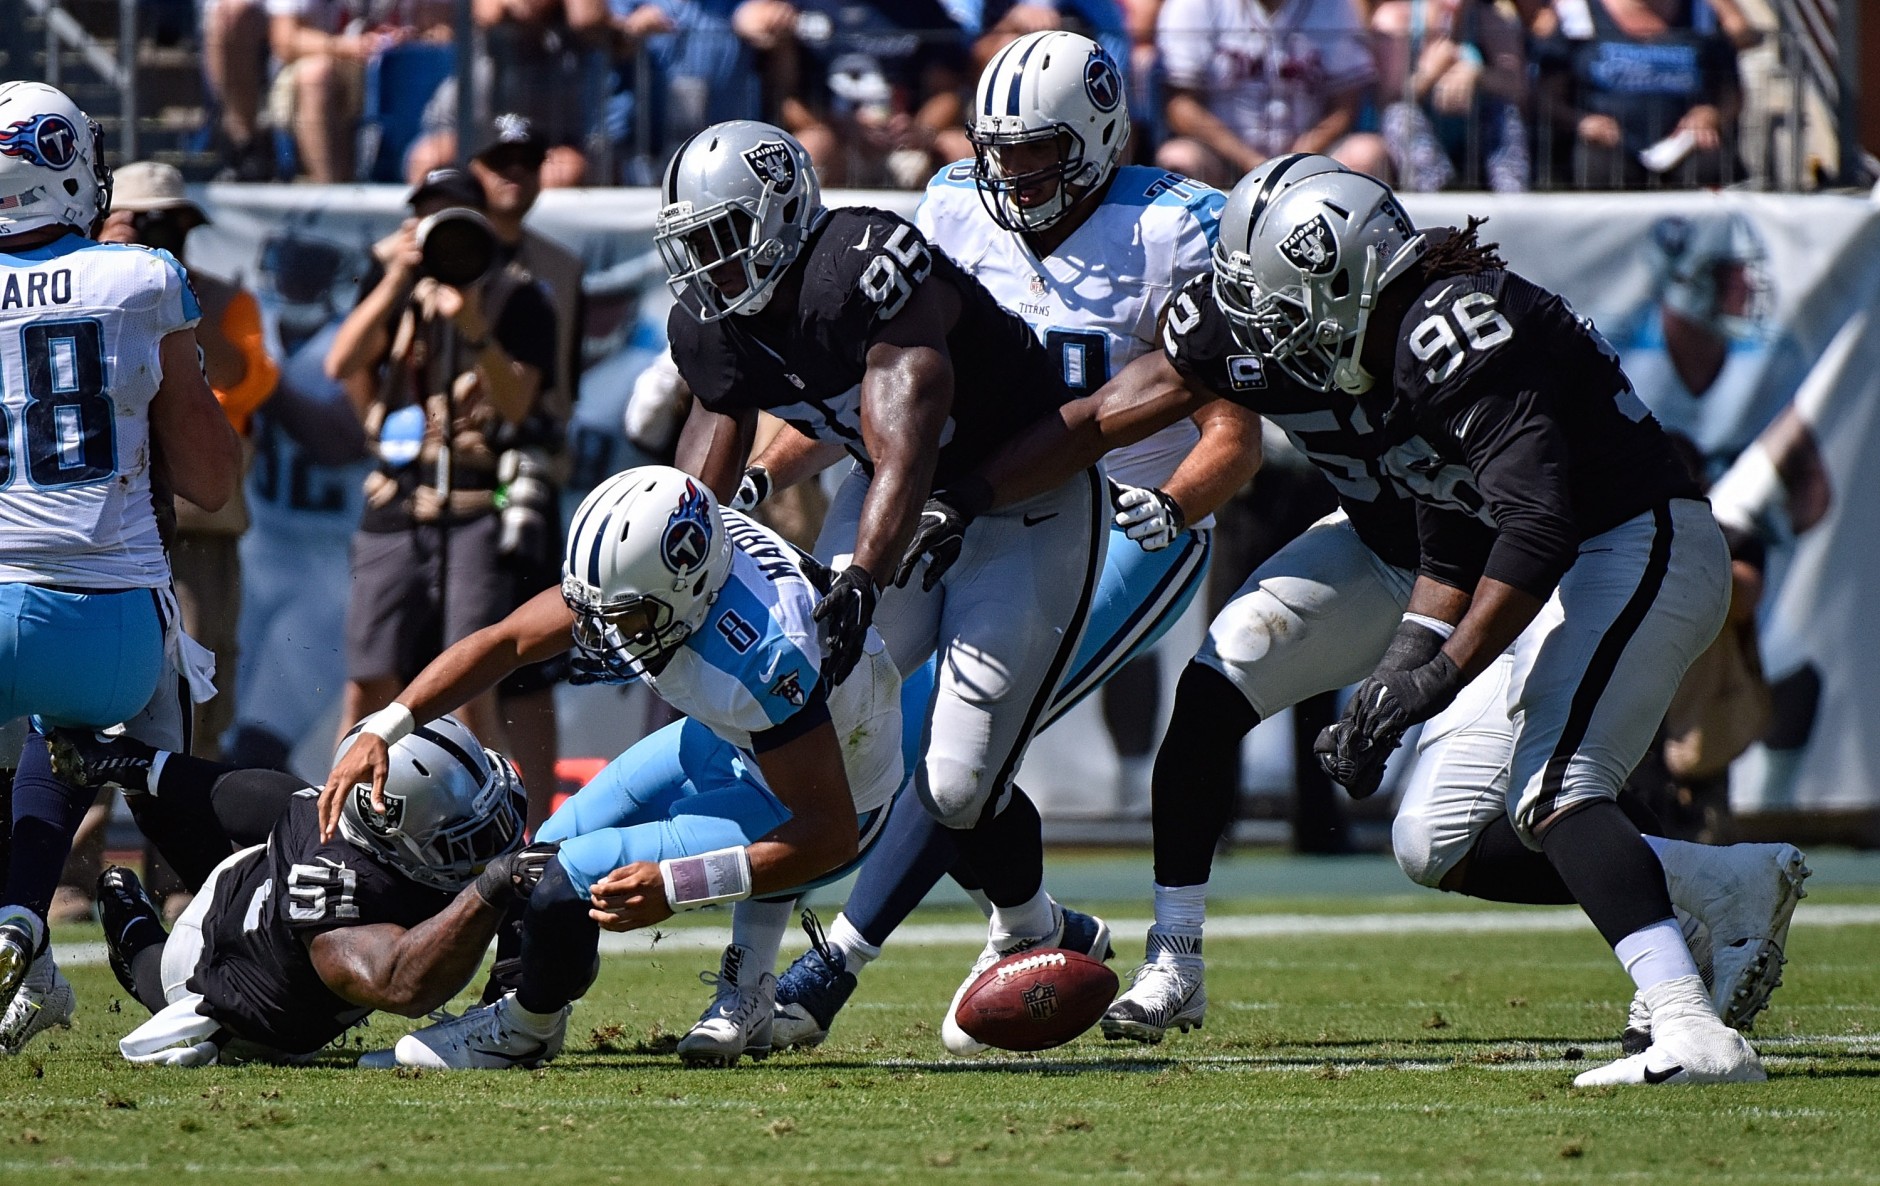 NASHVILLE, TN - SEPTEMBER 25:  Bruce Irvin #51 of the Oakland Raiders causes quarterback Marcus Mariota #8 of the Tennessee Titans to fumble during the first half at Nissan Stadium on September 25, 2016 in Nashville, Tennessee.  (Photo by Frederick Breedon/Getty Images)